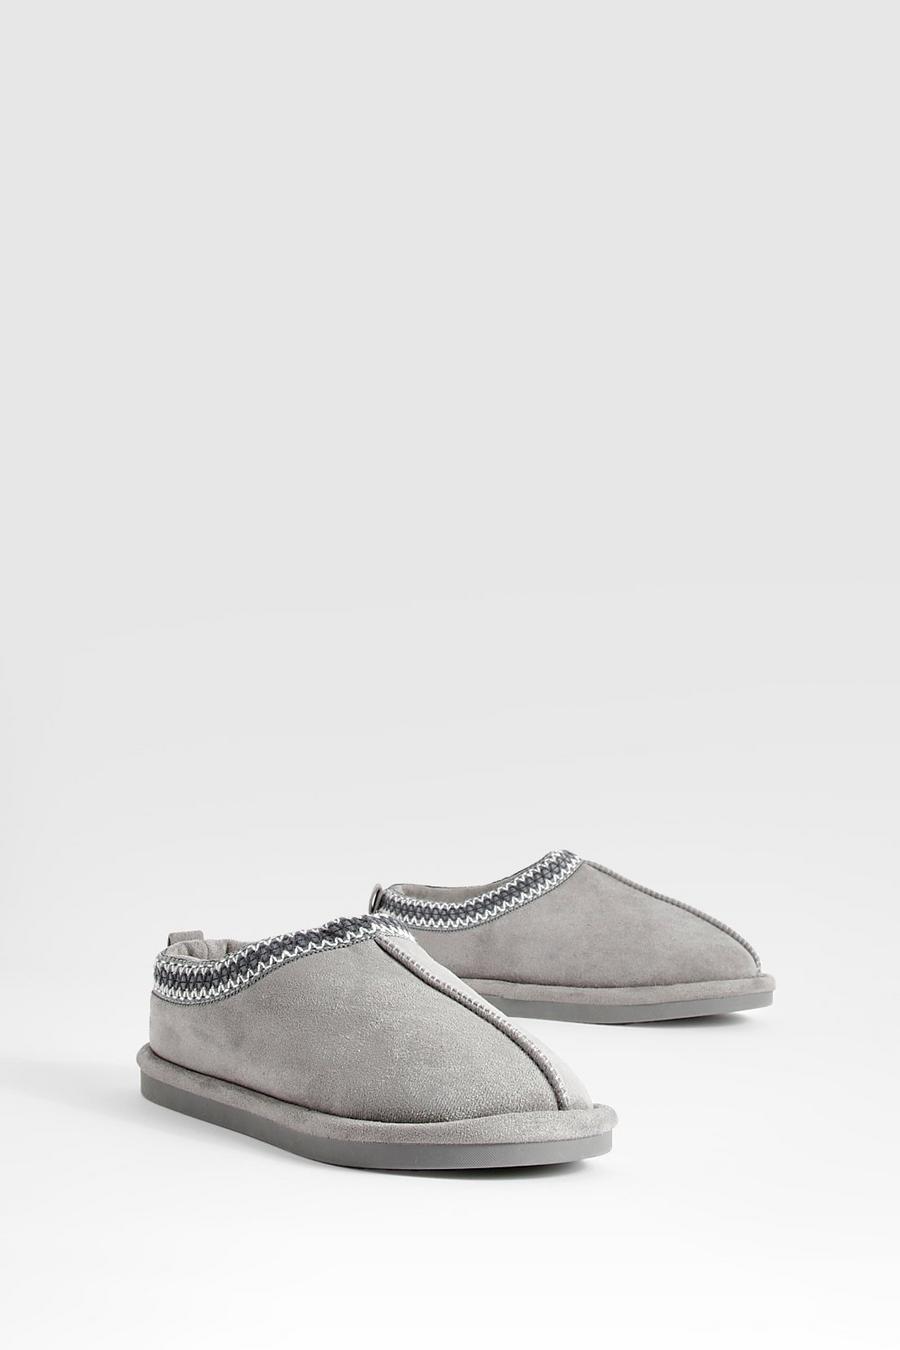 Grey Embroidered Slip On Cozy Mules